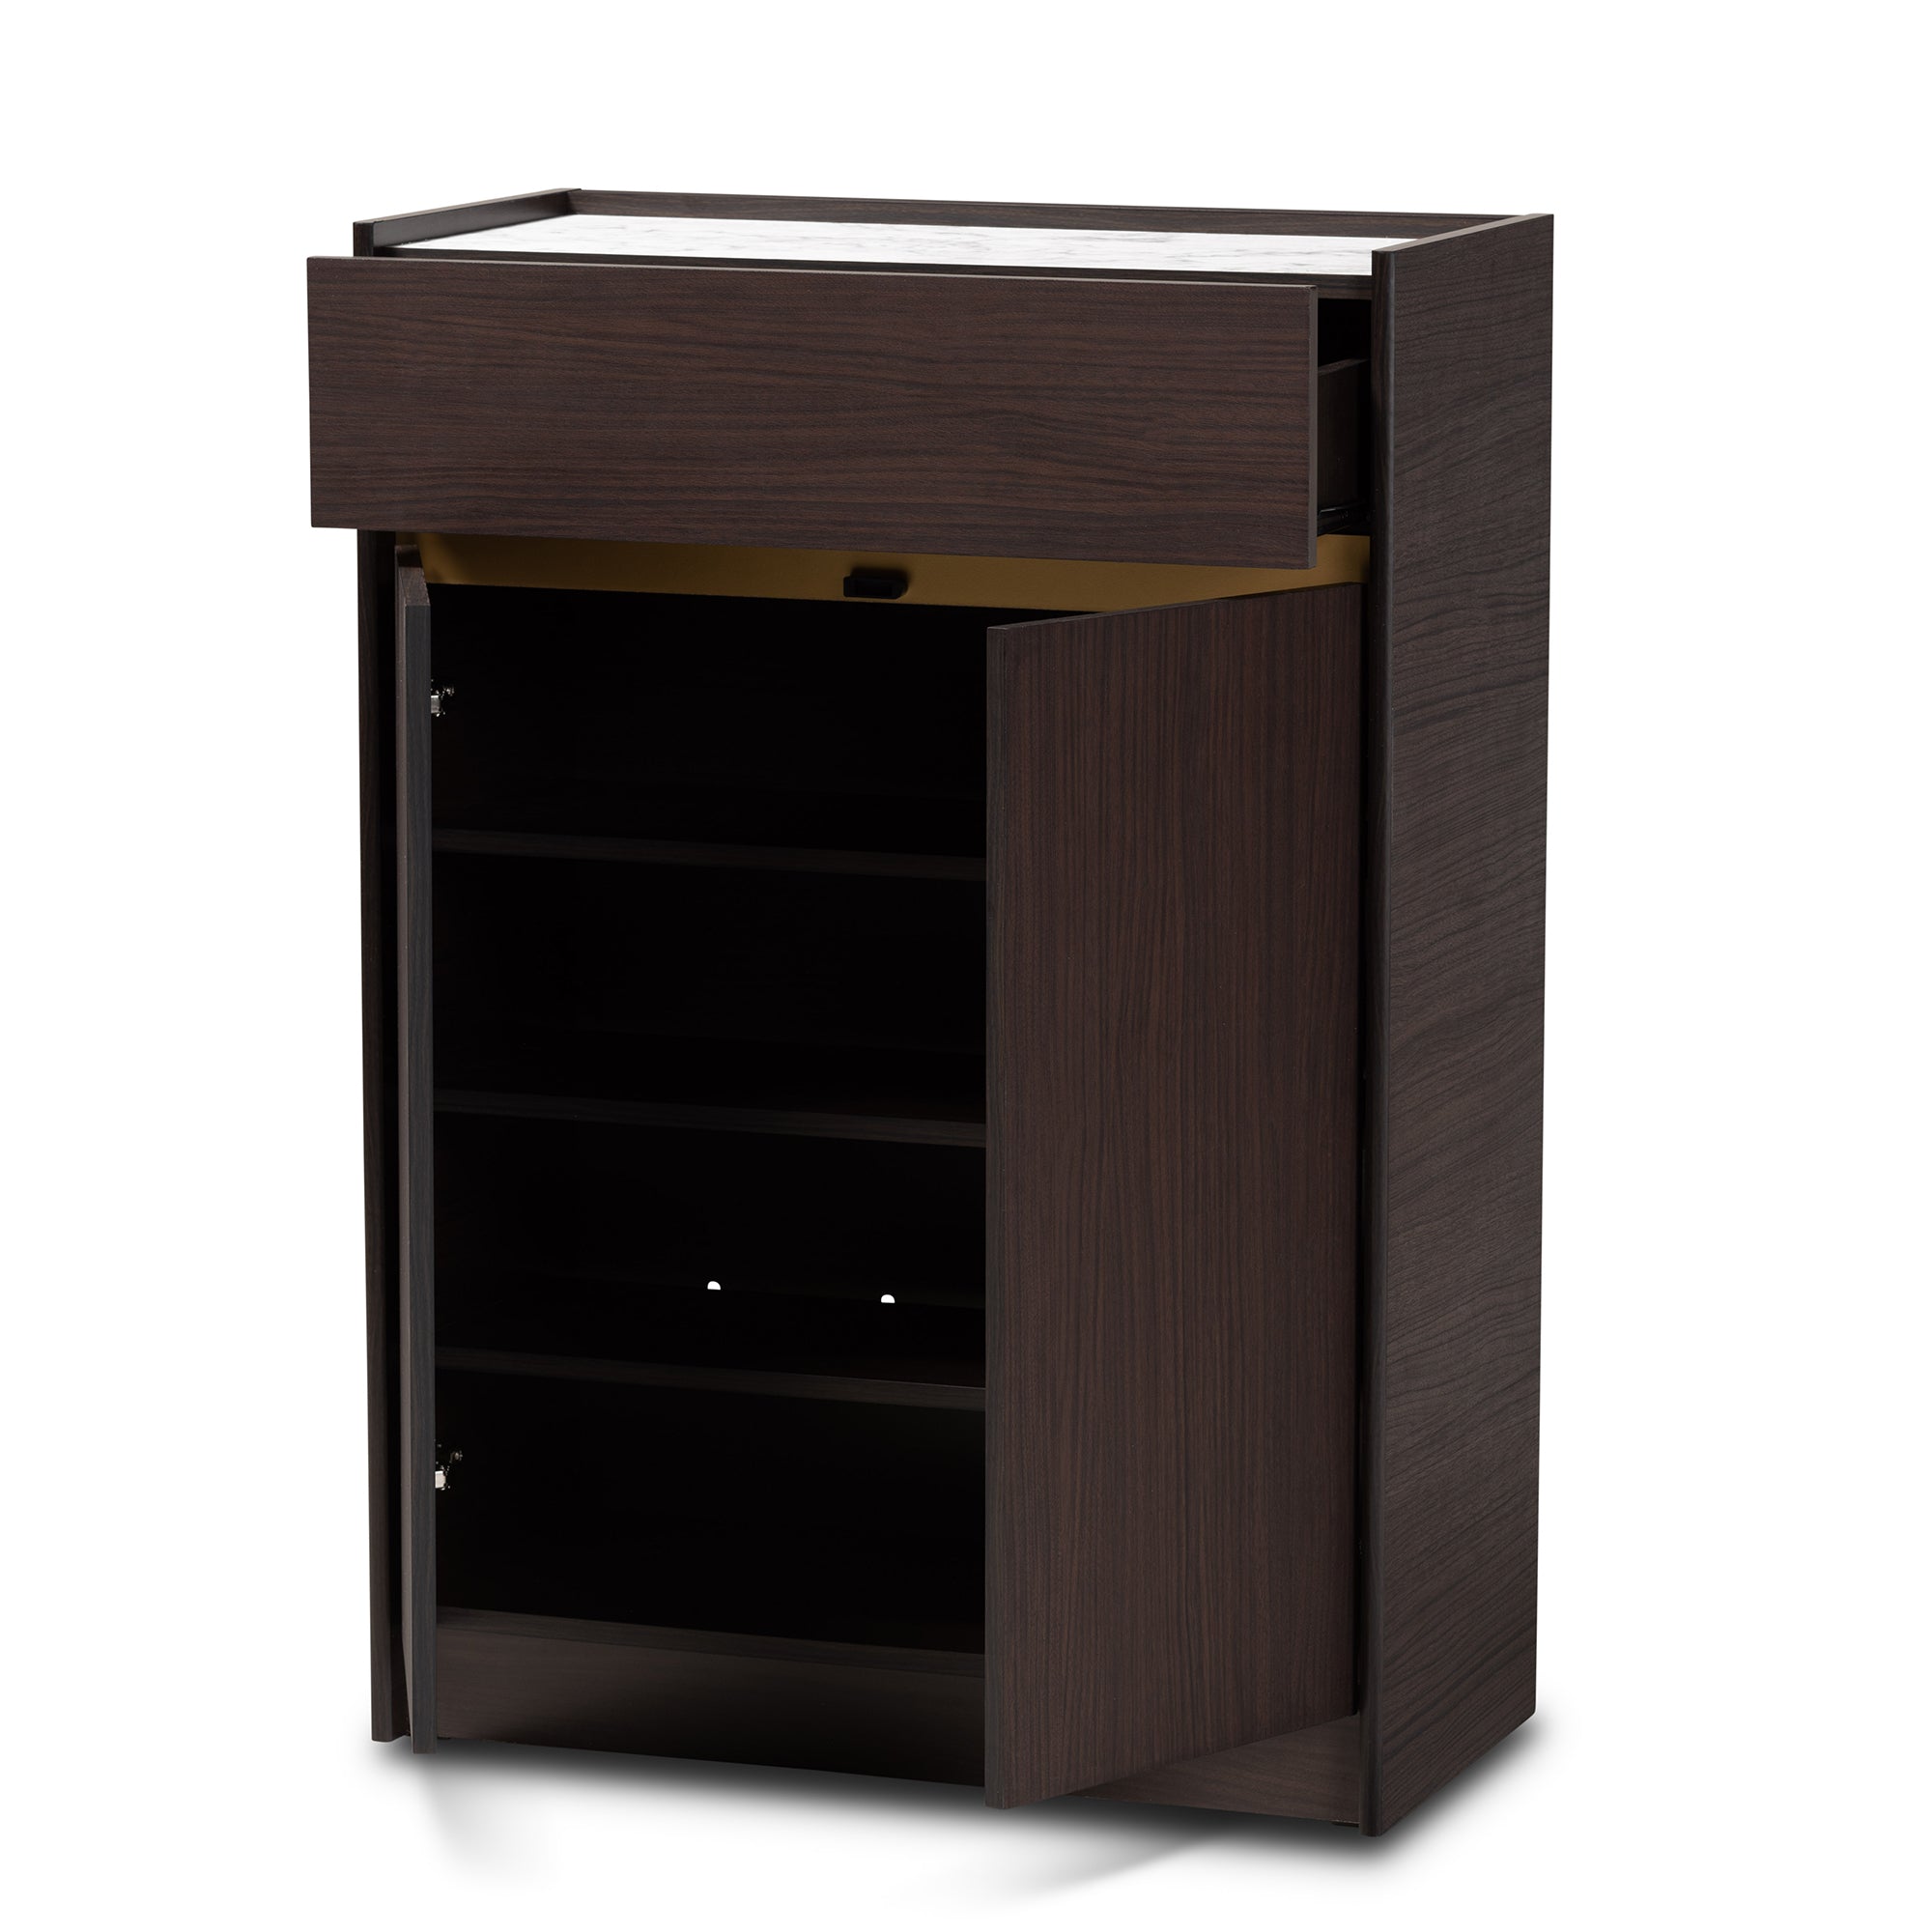 Walker Contemporary Shoe Cabinet with Faux Marble Top-Shoe Cabinet-Baxton Studio - WI-Wall2Wall Furnishings